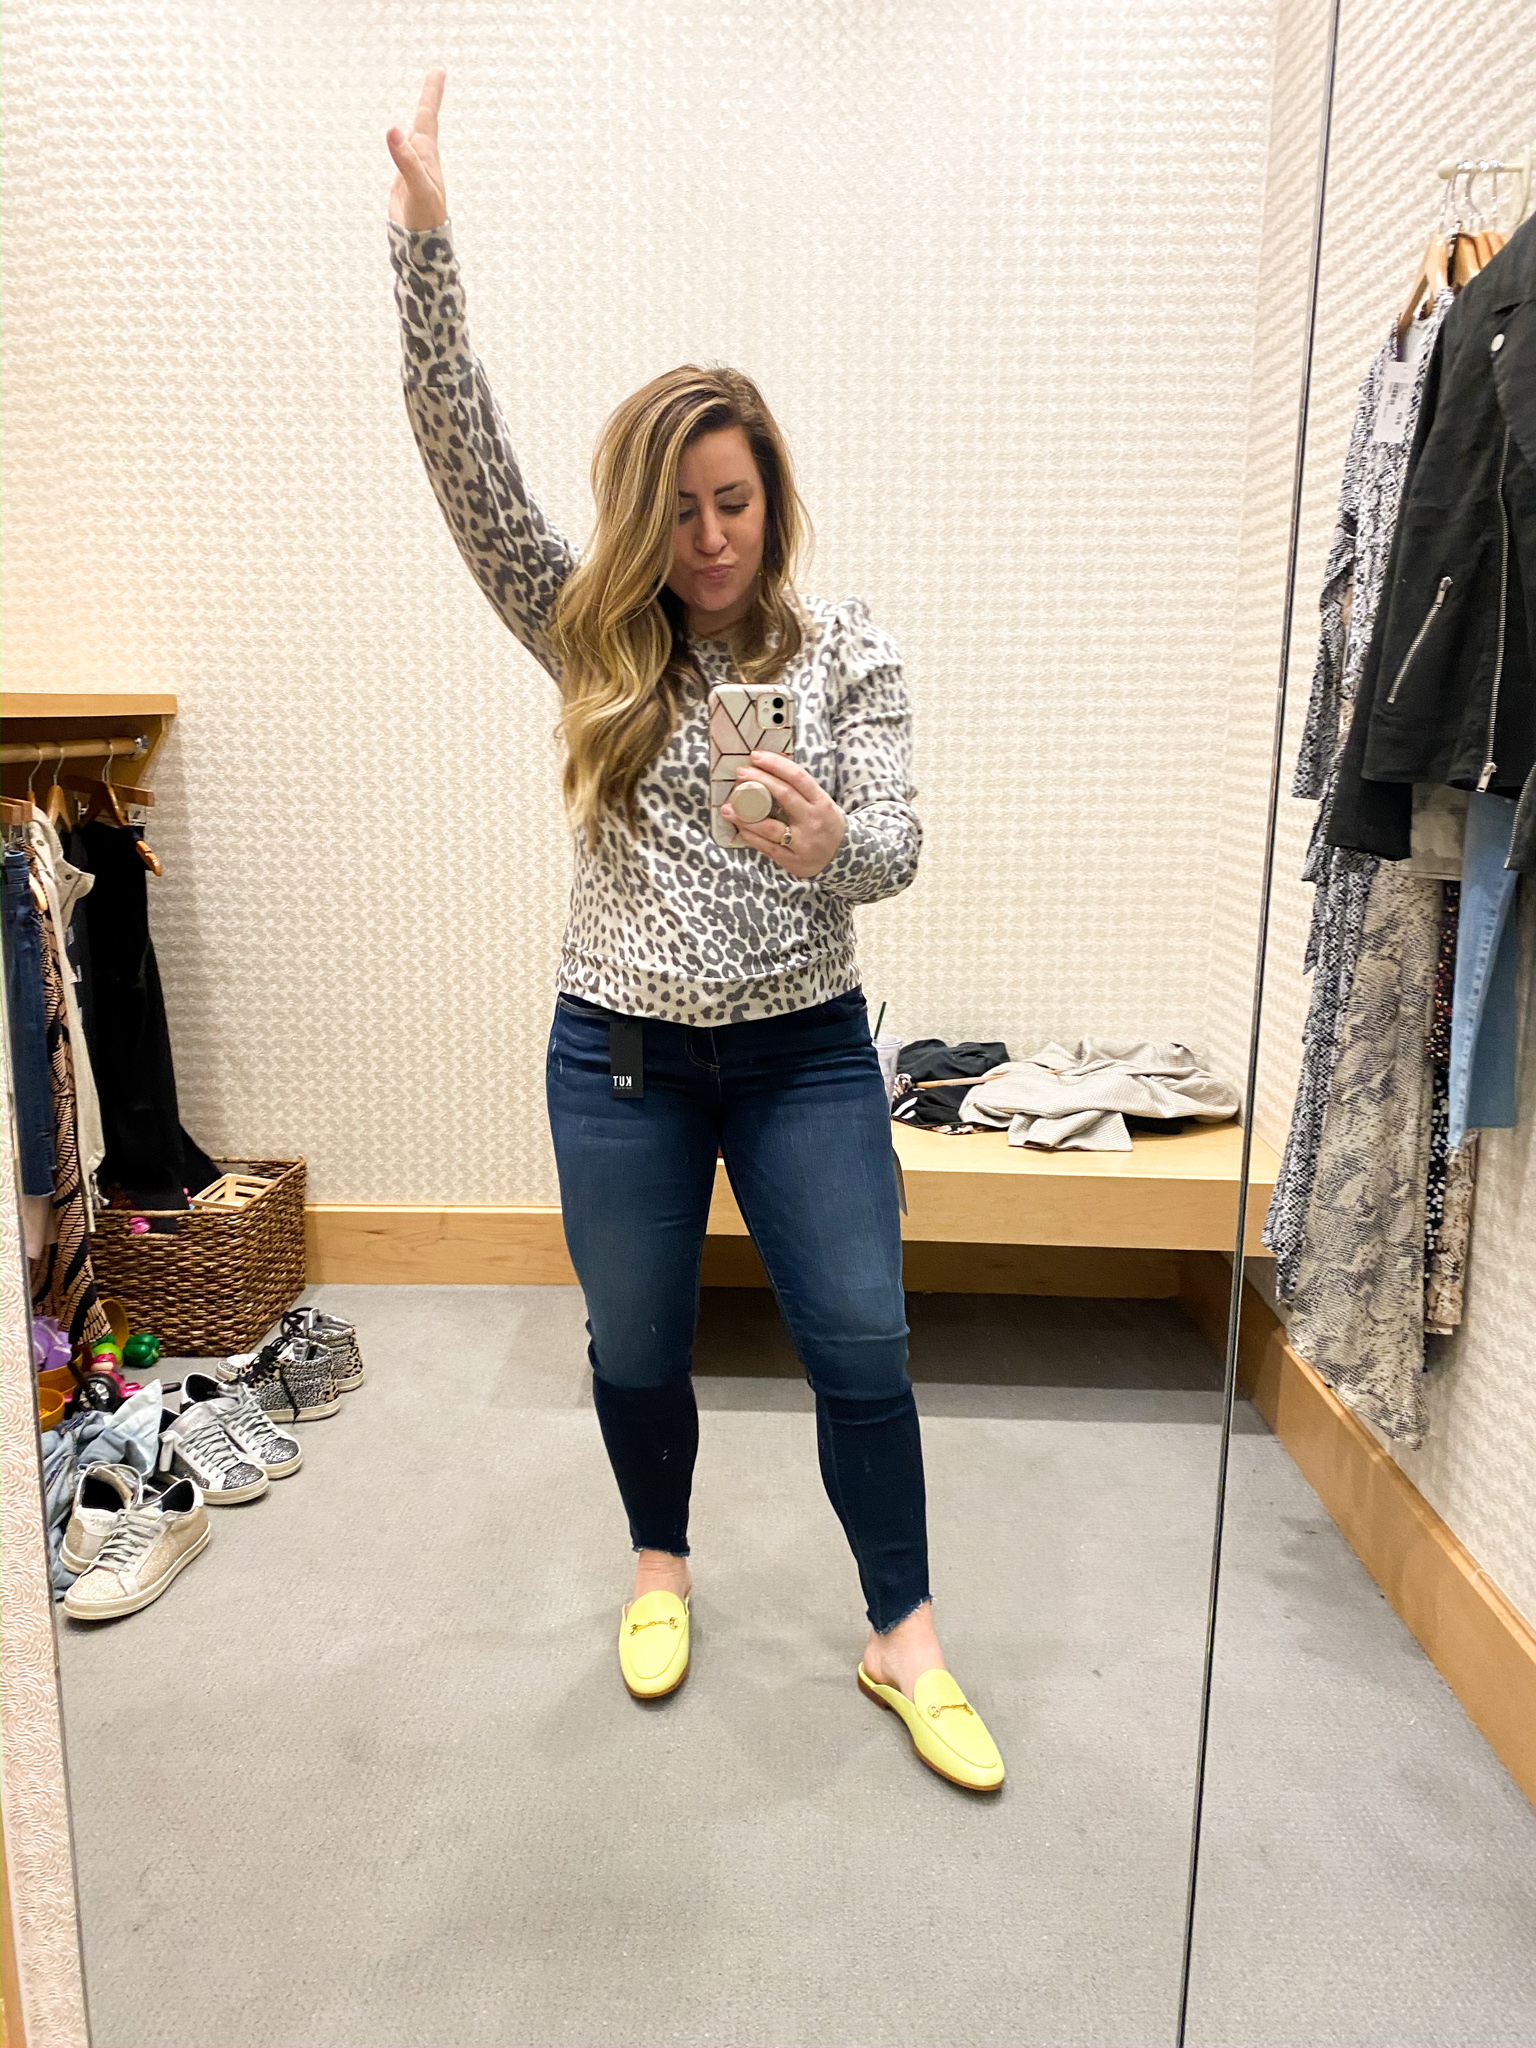 Evereve Outfits by popular Ohio fashion blog, Coffee Beans and Bobby Pins: image of a woman standing in a dressing room and wearing Evereve Chaser Leopard Puff Sleeve Sweatshirt, Evereve Agolde Sophie Crop, and Evereve Sam Edelman Linnie Slide.